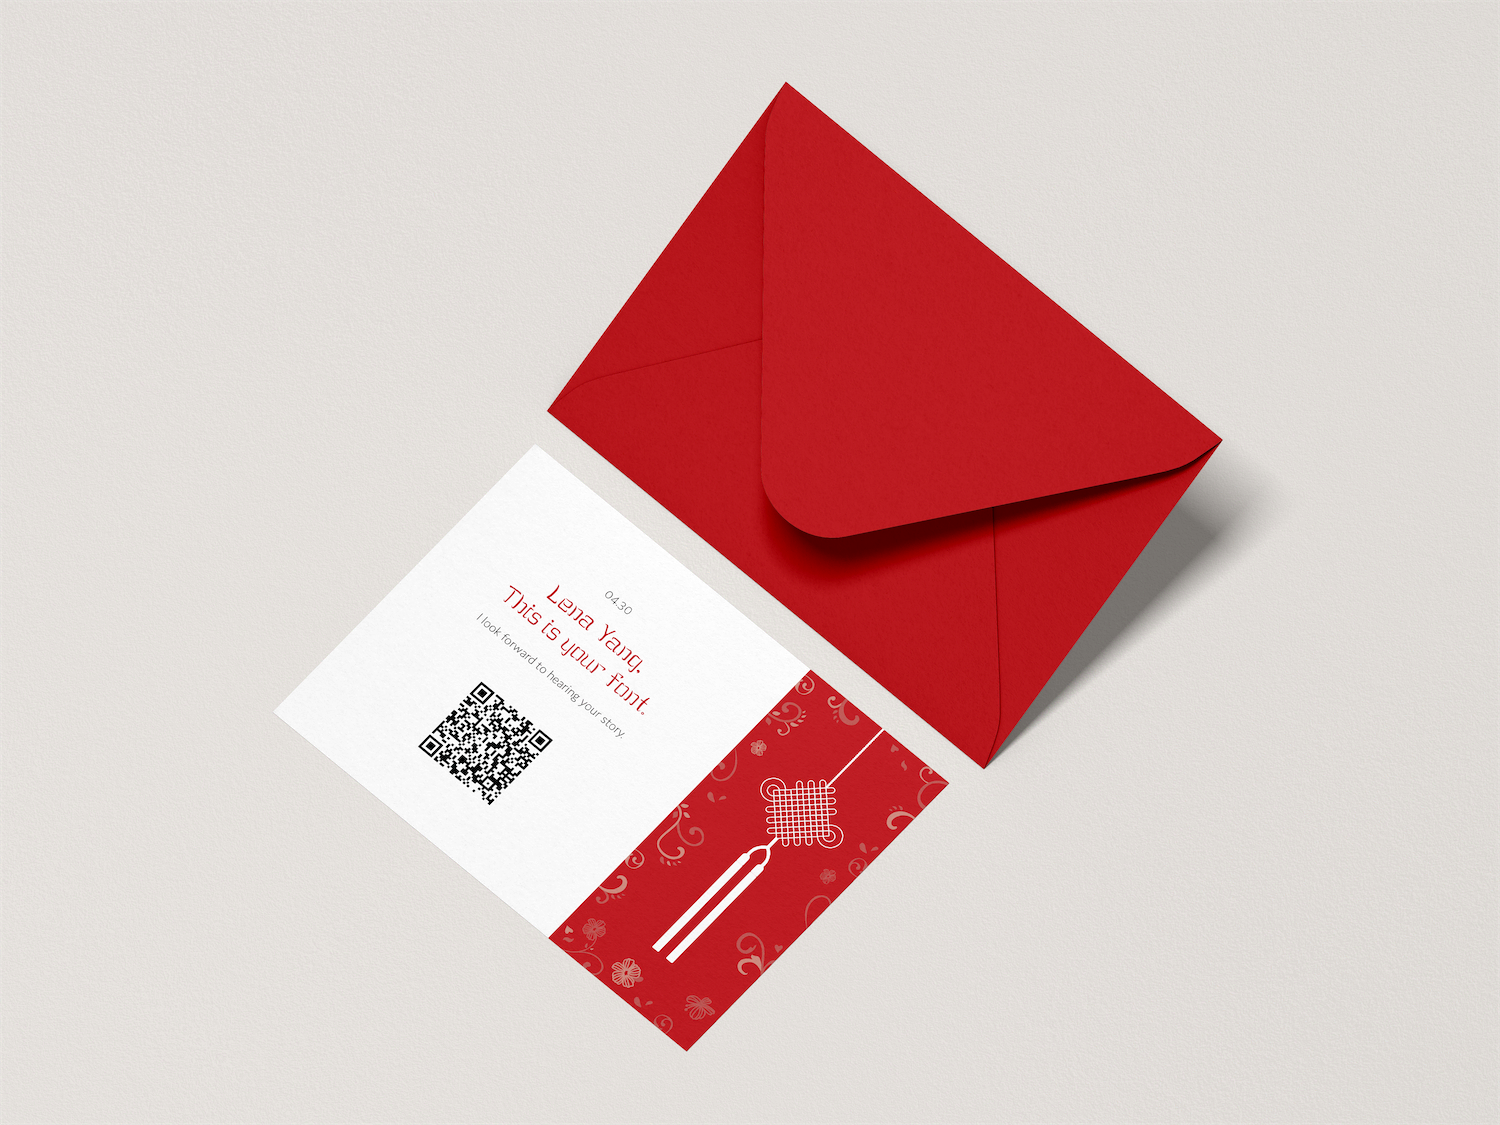 A mockup of the invitation lays next to a deep red envelope.